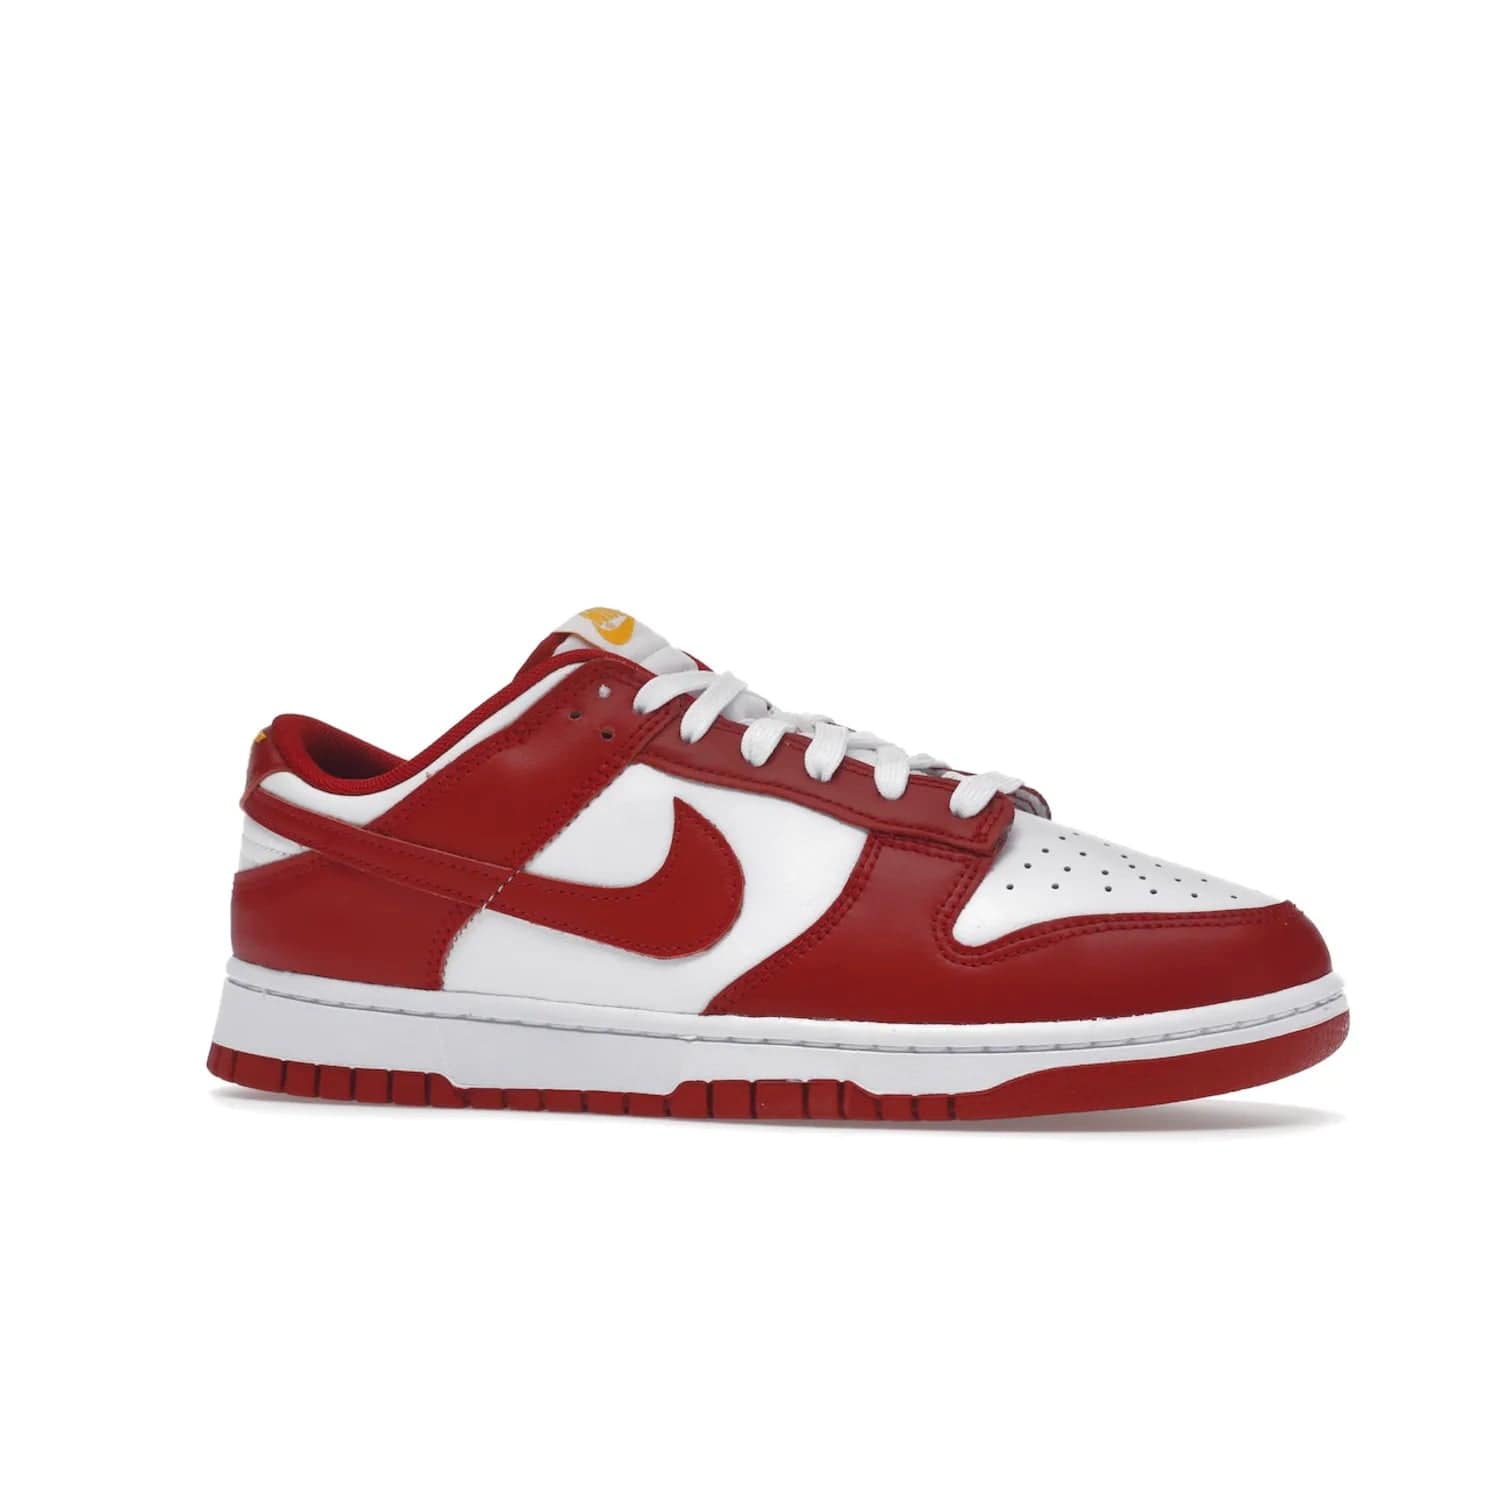 Nike Dunk Low USC - Image 3 - Only at www.BallersClubKickz.com - The Nike Dunk Low USC DD1391-602 colorway captures the eye of University of Southern California fans. Crafted with leather and rubber upper and outsole, this stylish sneaker features a white, gym red, and yellow colorway. With yellow Nike branding, white perforated vamp, and red suede Swoosh, this sneaker turns heads. Get the classic Nike Dunk Low USC releasing on November 9th, 2022.